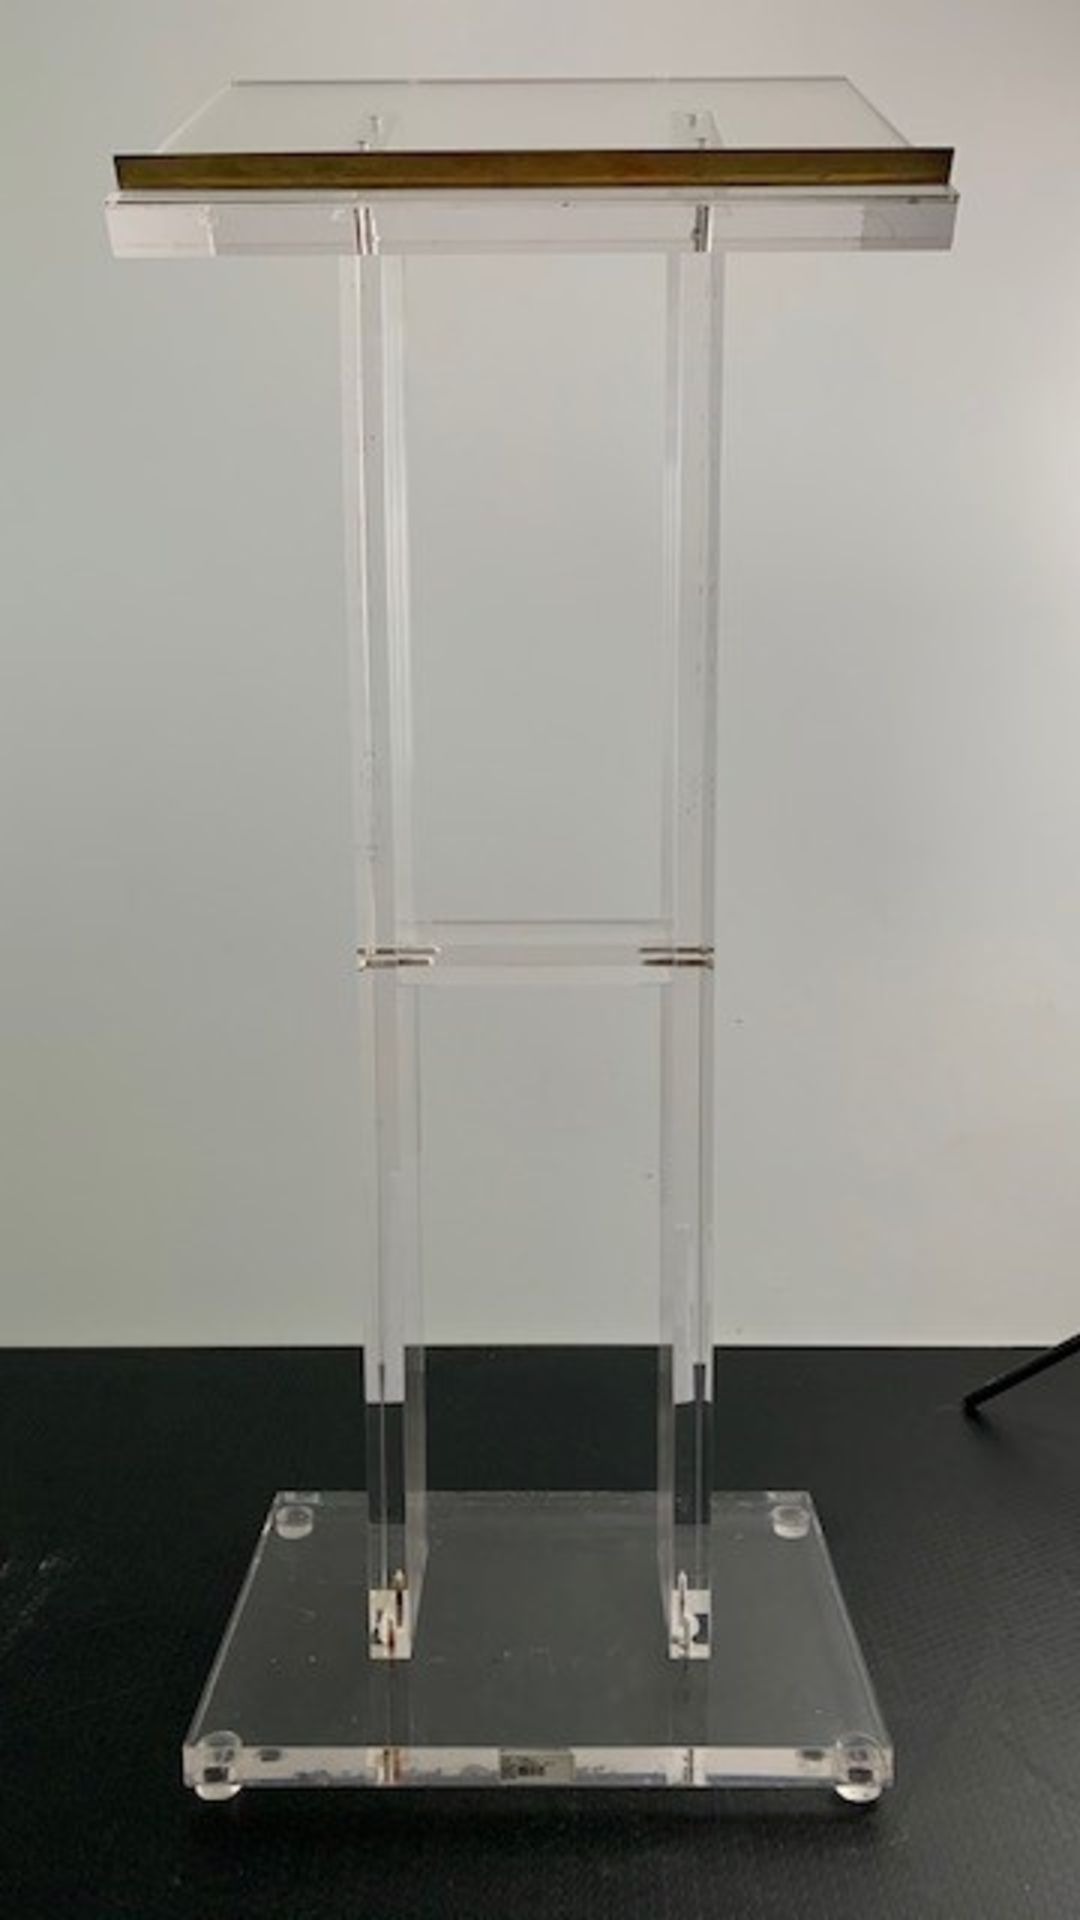 1 x Clear Perspex Lectern Stand With Wheeled Flight Case - Ref: 825 - CL581 - Location: Altrincham